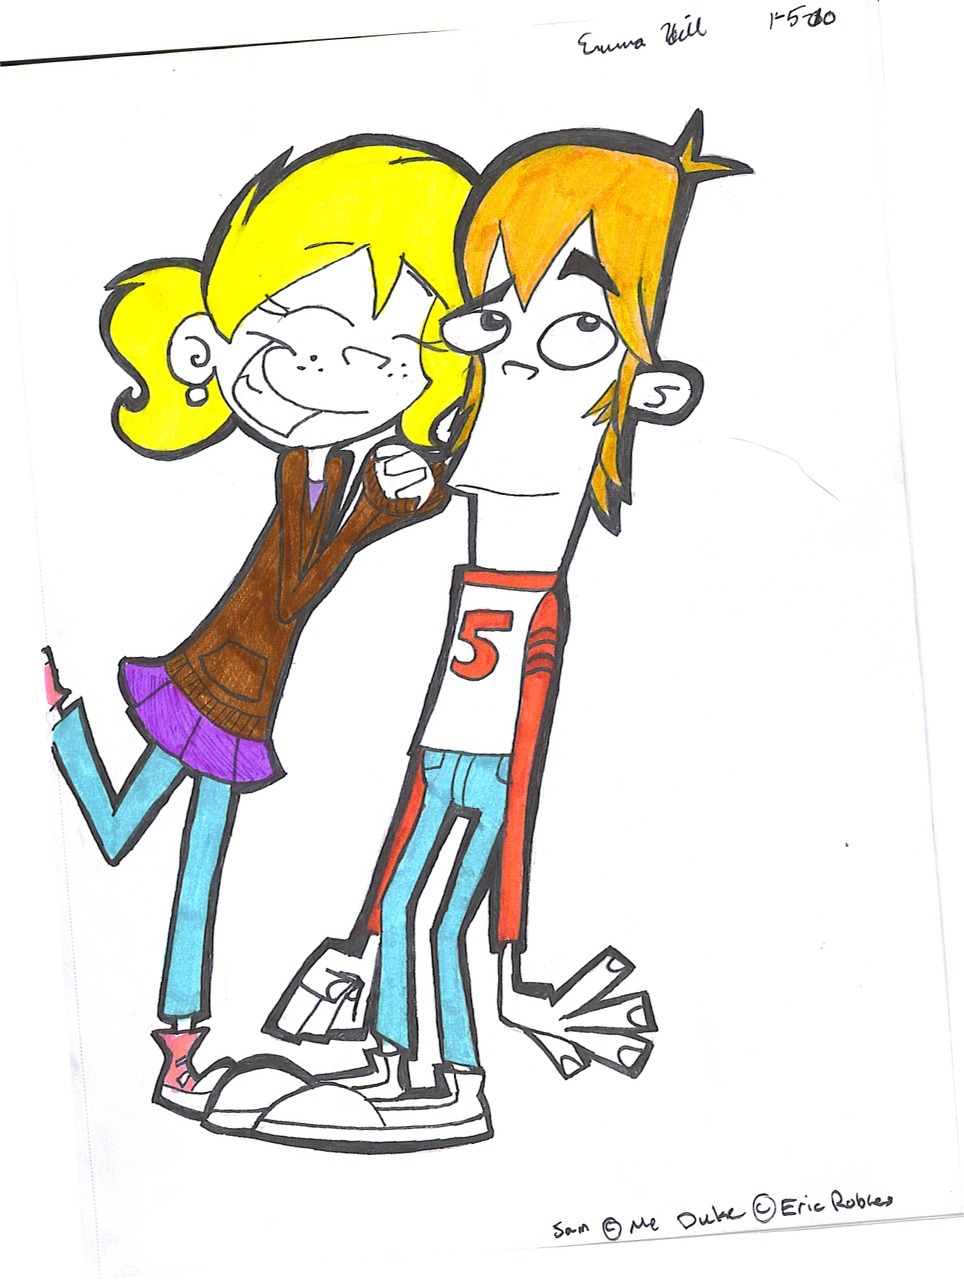 Sam and Duke. My first drawing of Duke… the first fan drawing of duke on here as far as i know… Not much to say… I’m trying to learn how to draw all of the classmates cuz i love everyone. This is Sam just being her silly self as usual.
Emma signing...